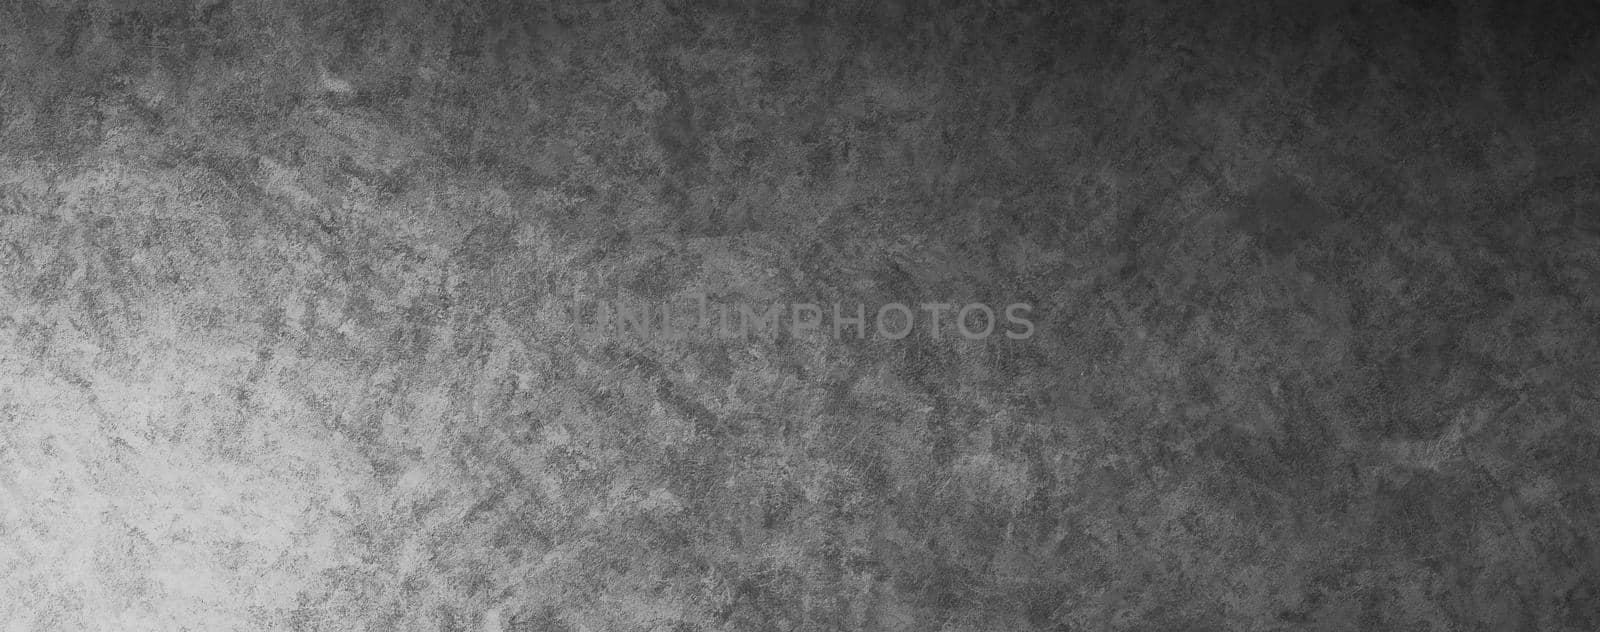 Abstract Grungy Wall Dark Abstract Texture Background by yay_lmrb